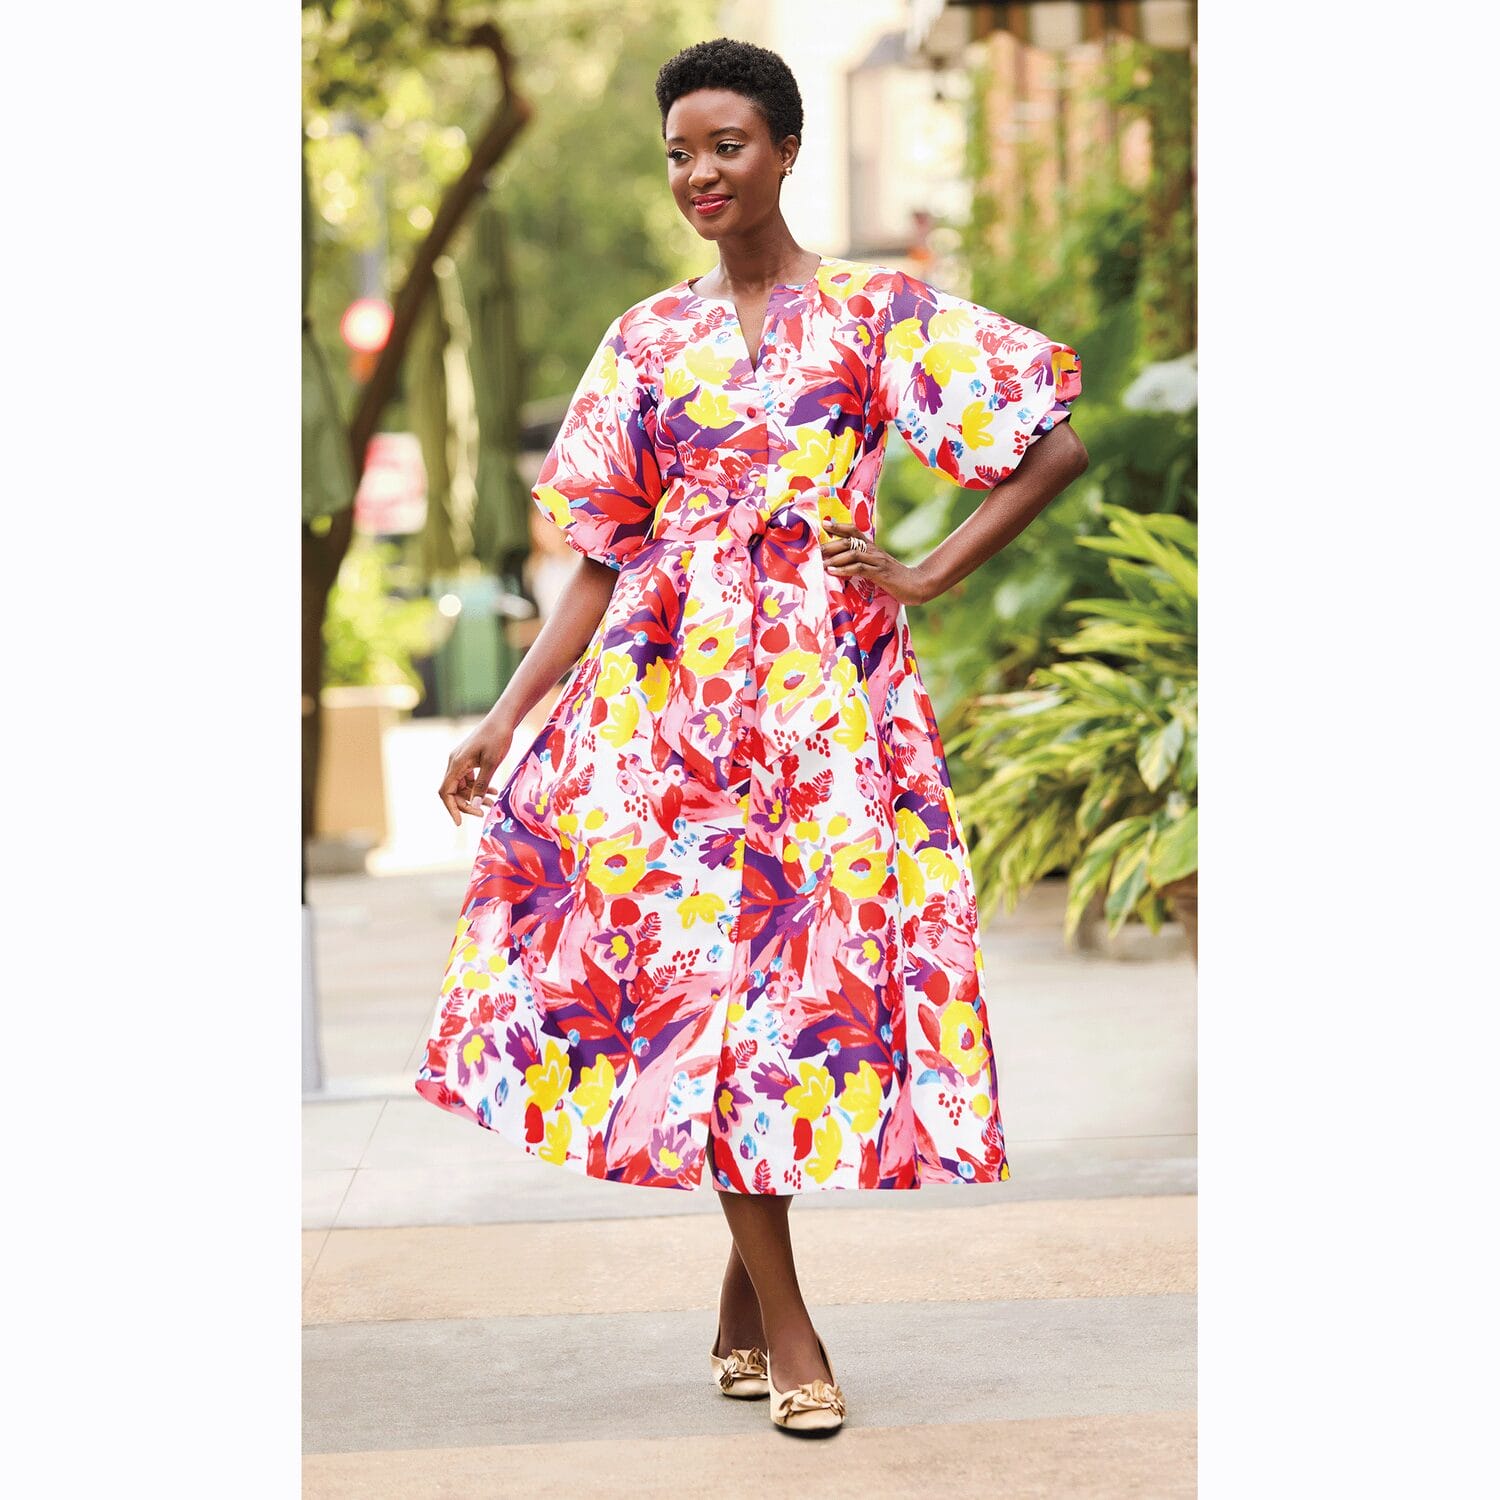 Black model wearing a colorful fit and flare dress.